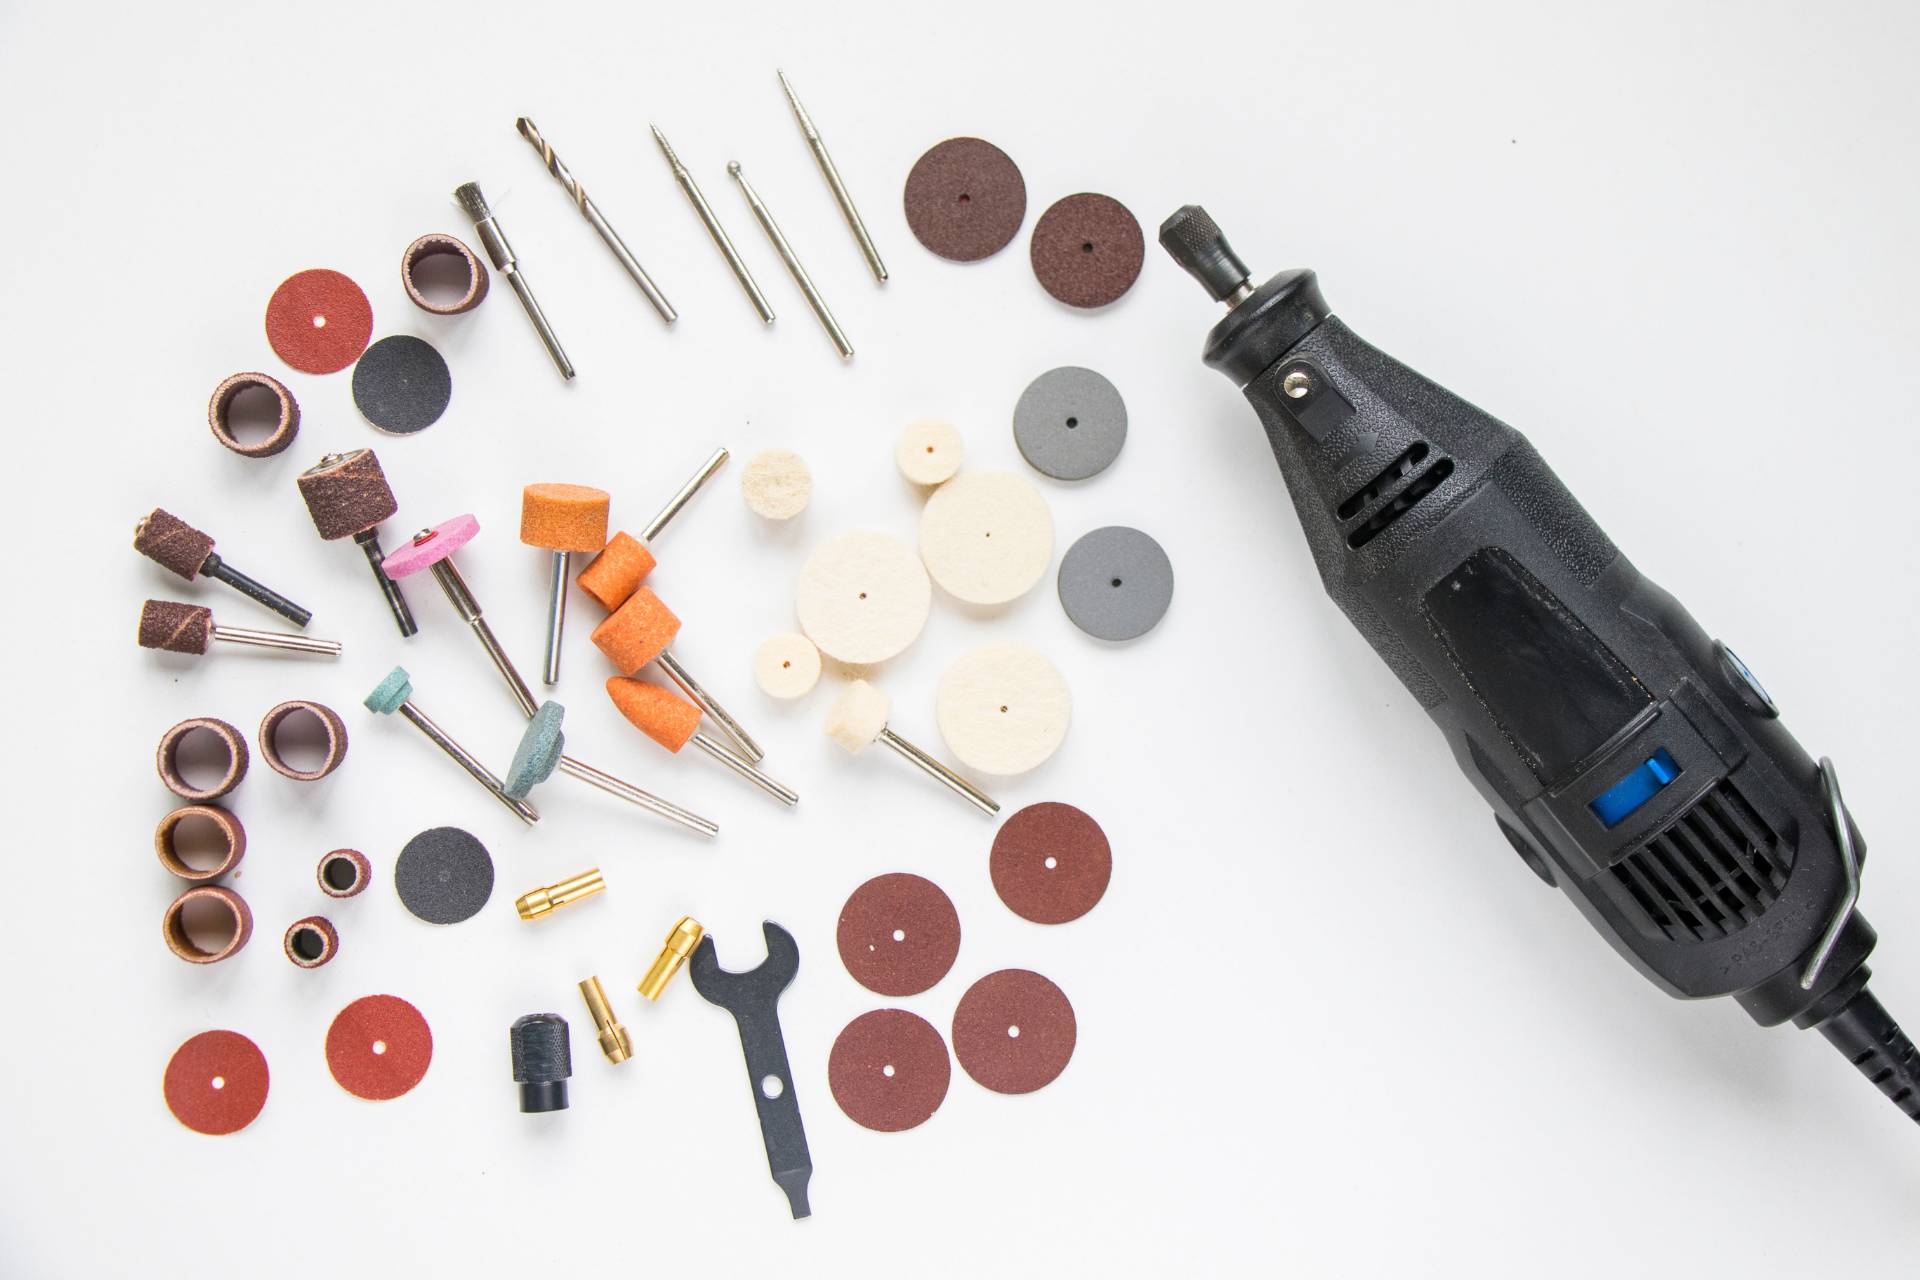 An array of rotary tool attachments including sanding discs, grinding bits, and polishing wheels laid out next to a rotary tool, showcasing the versatility of the tool for detailed work